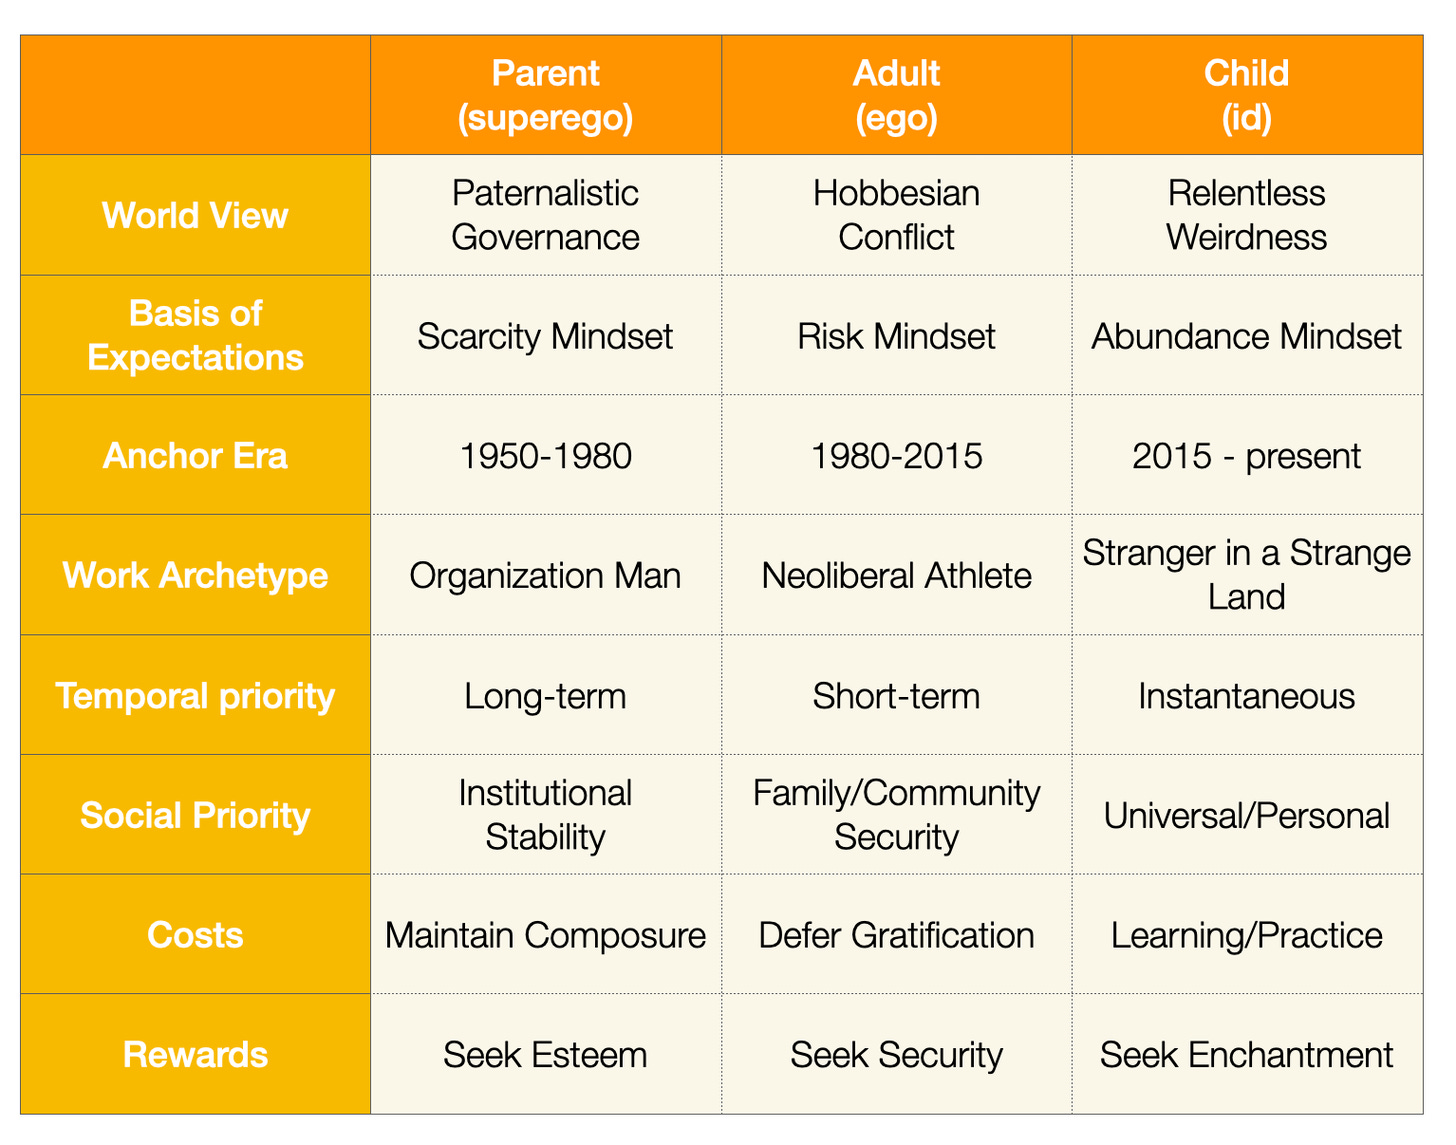 A comparison table of three psyche dimmensions: Parent (superego), Adult (ego), Child (id), across eight elements, including World View, Work Archetype, Rewards